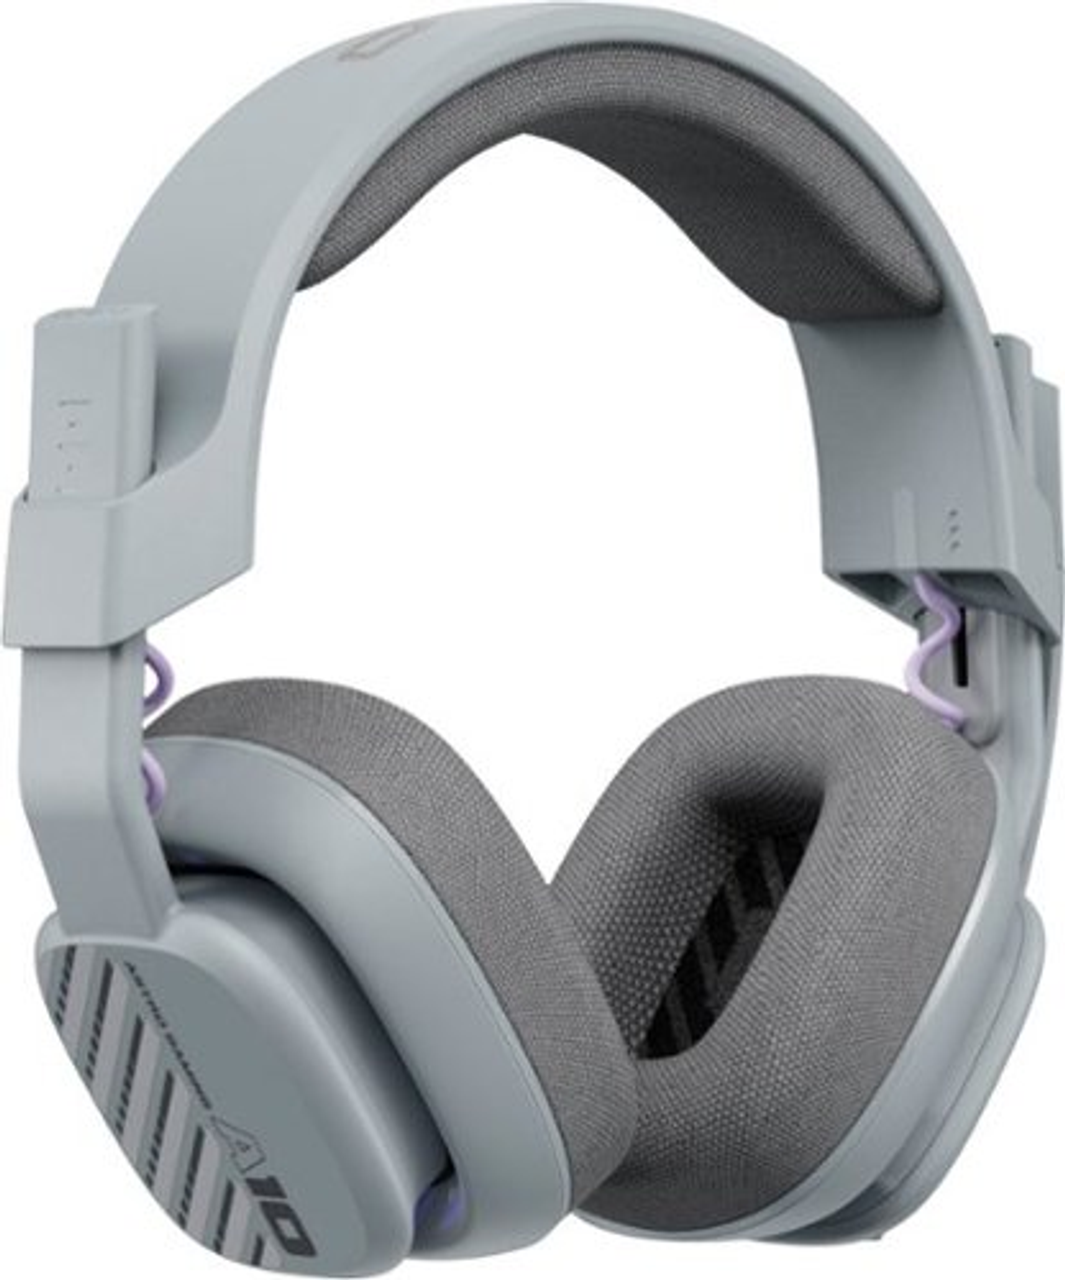 Astro Gaming - A10 Gen 2 Wired Over-ear Gaming Headset for PC with Flip-to-Mute Microphone - Gray